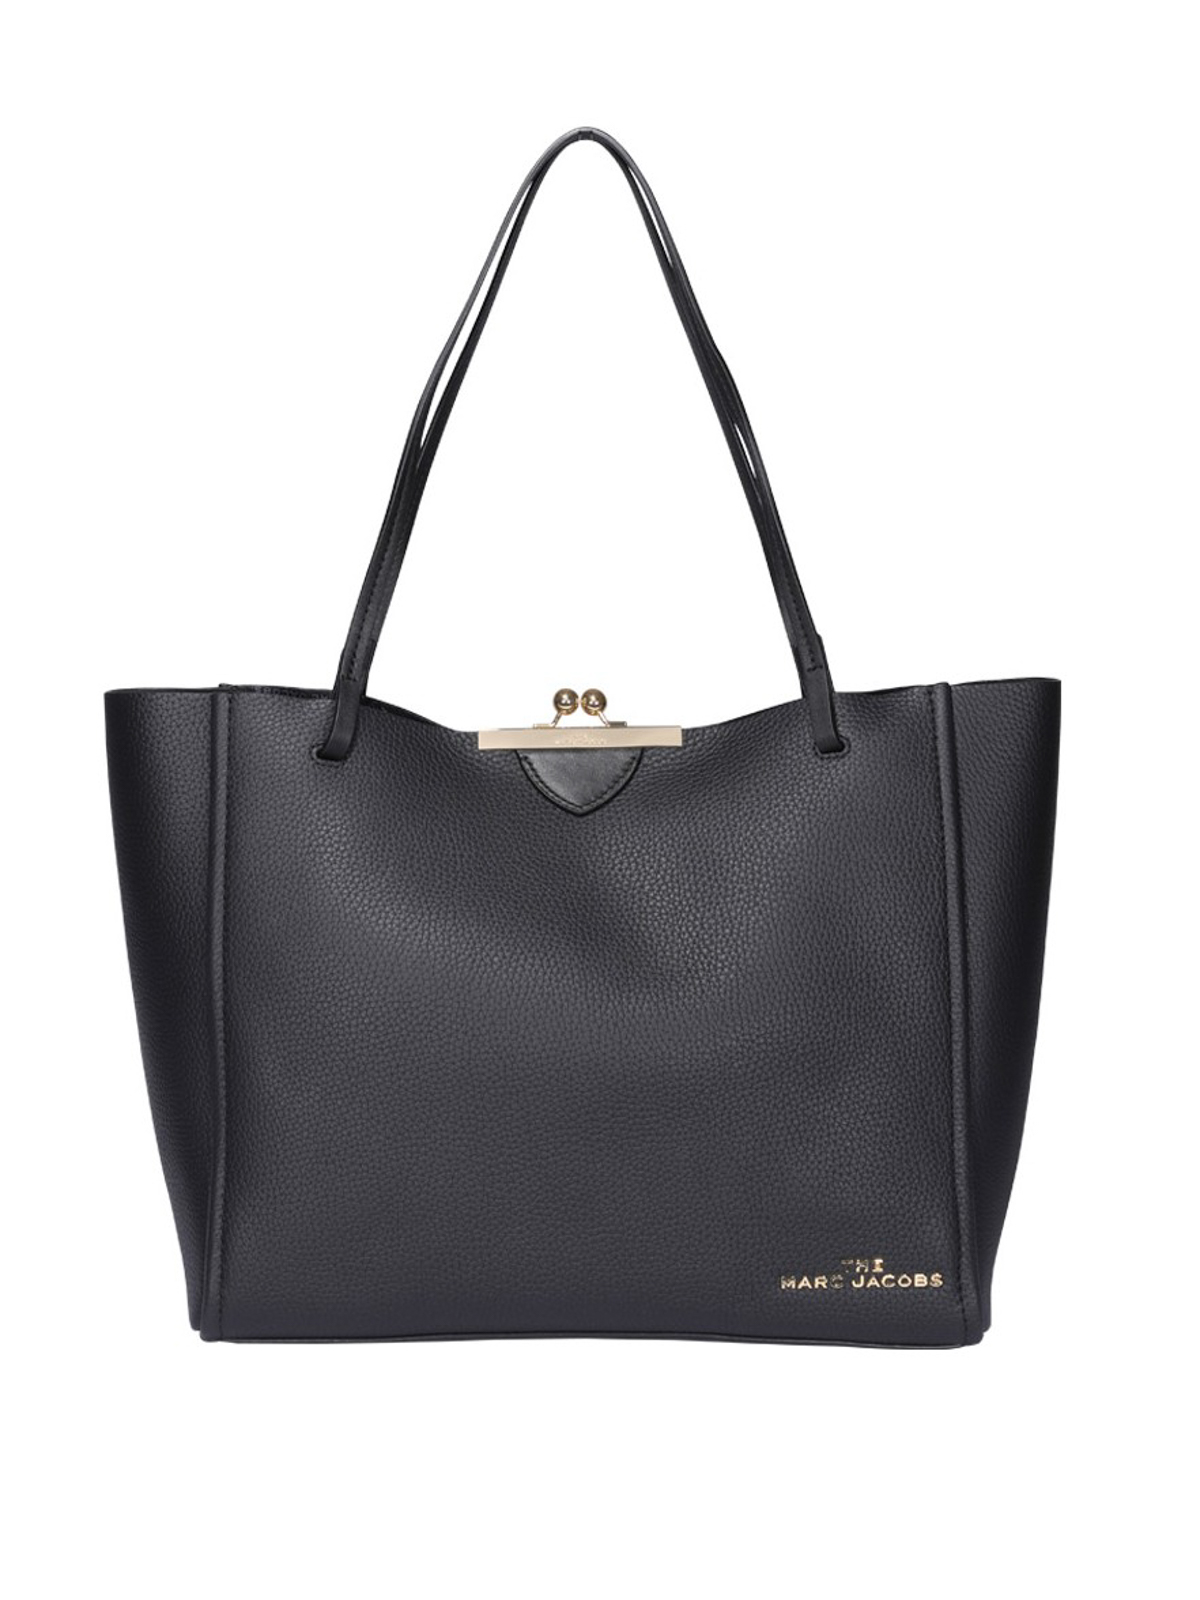 MARC JACOBS THE KISS LOCK TOTE